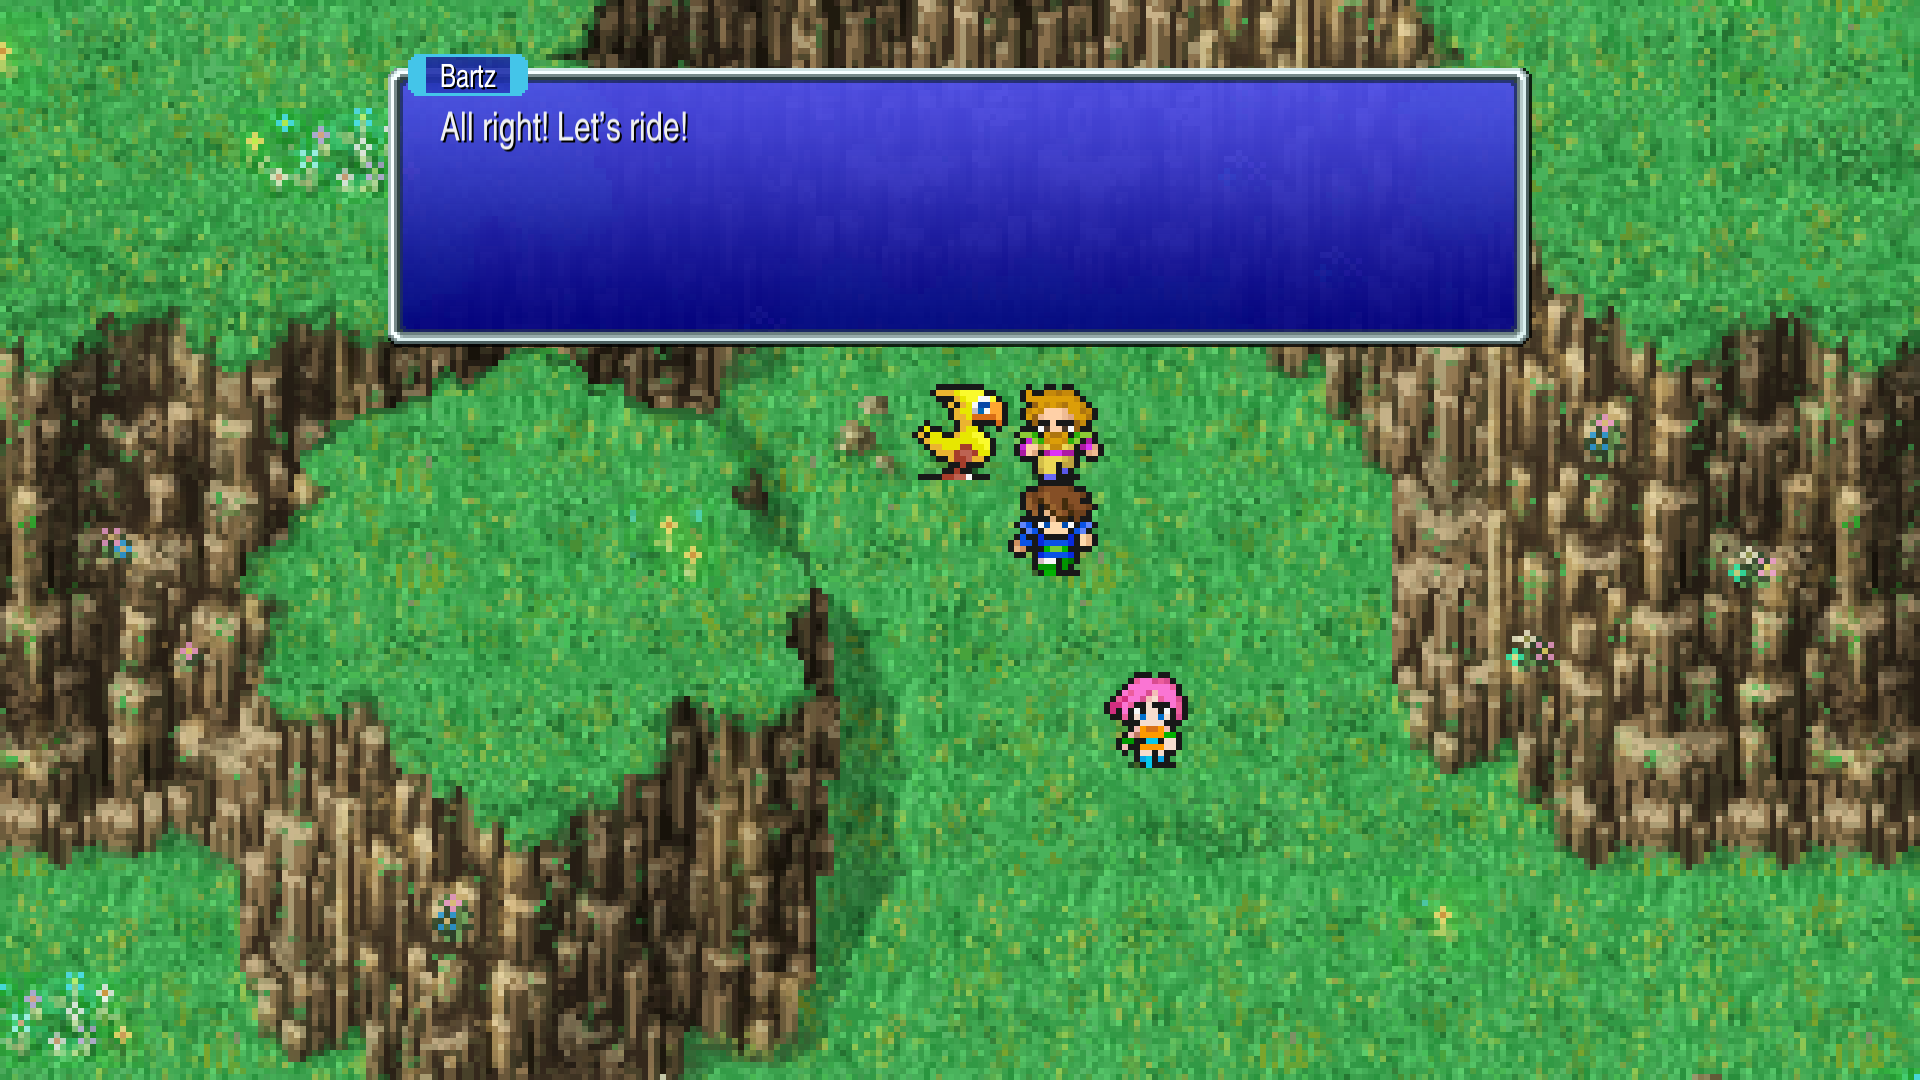 Gameplay screenshot showing the FINAL FANTASY V party with a chocobo on the world map